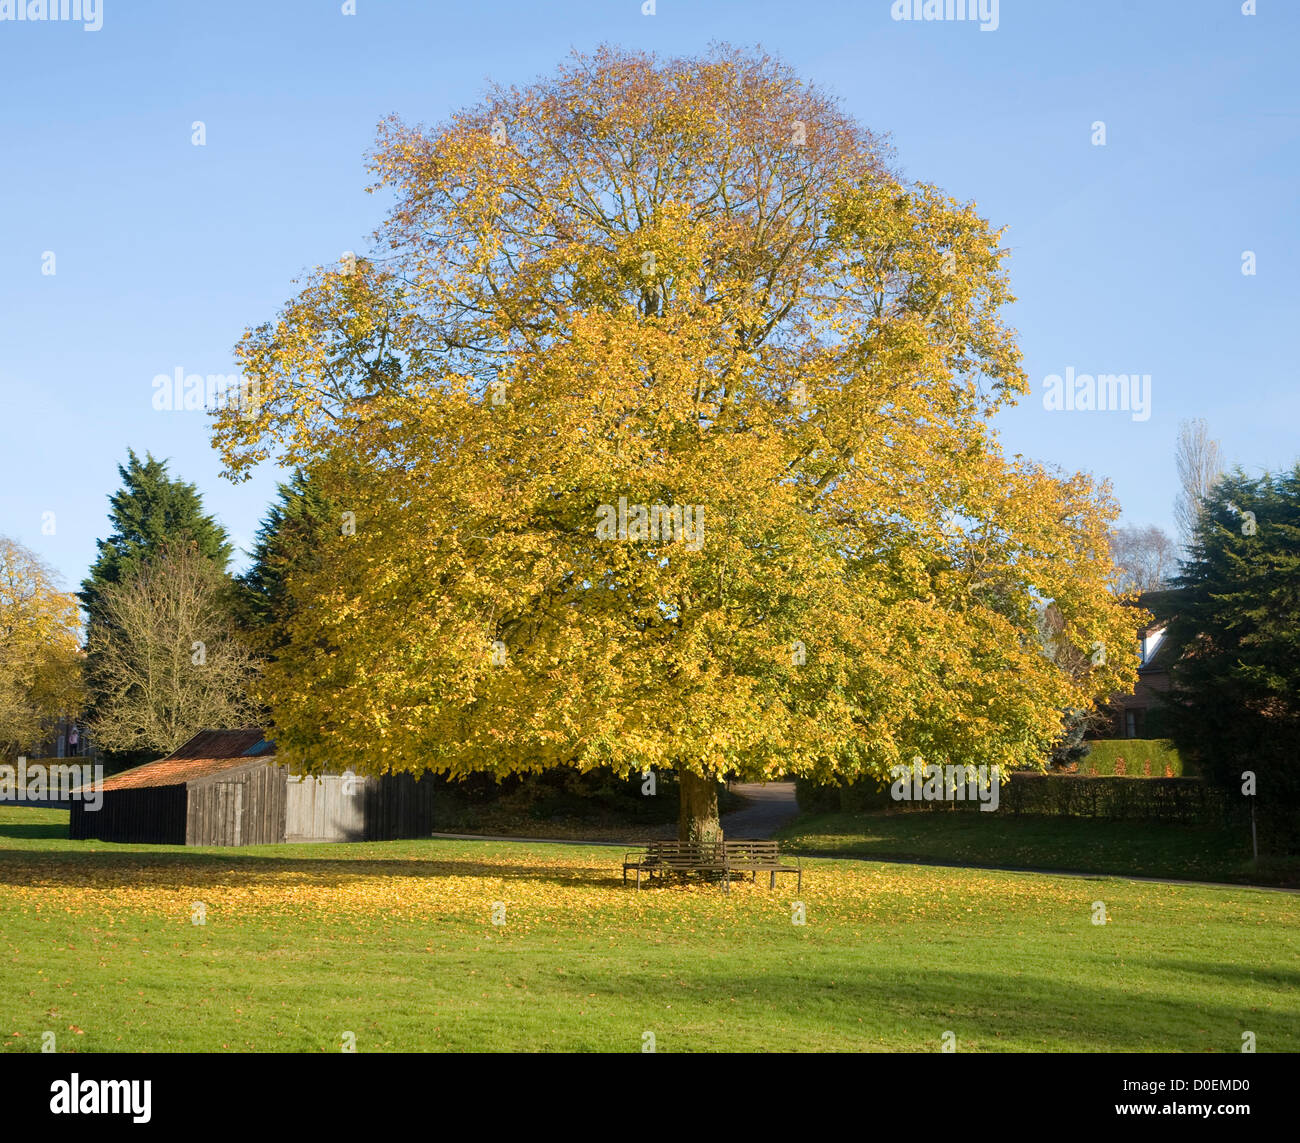 Large lime tree in autumn leaf on village green Westleton, Suffolk, England Stock Photo